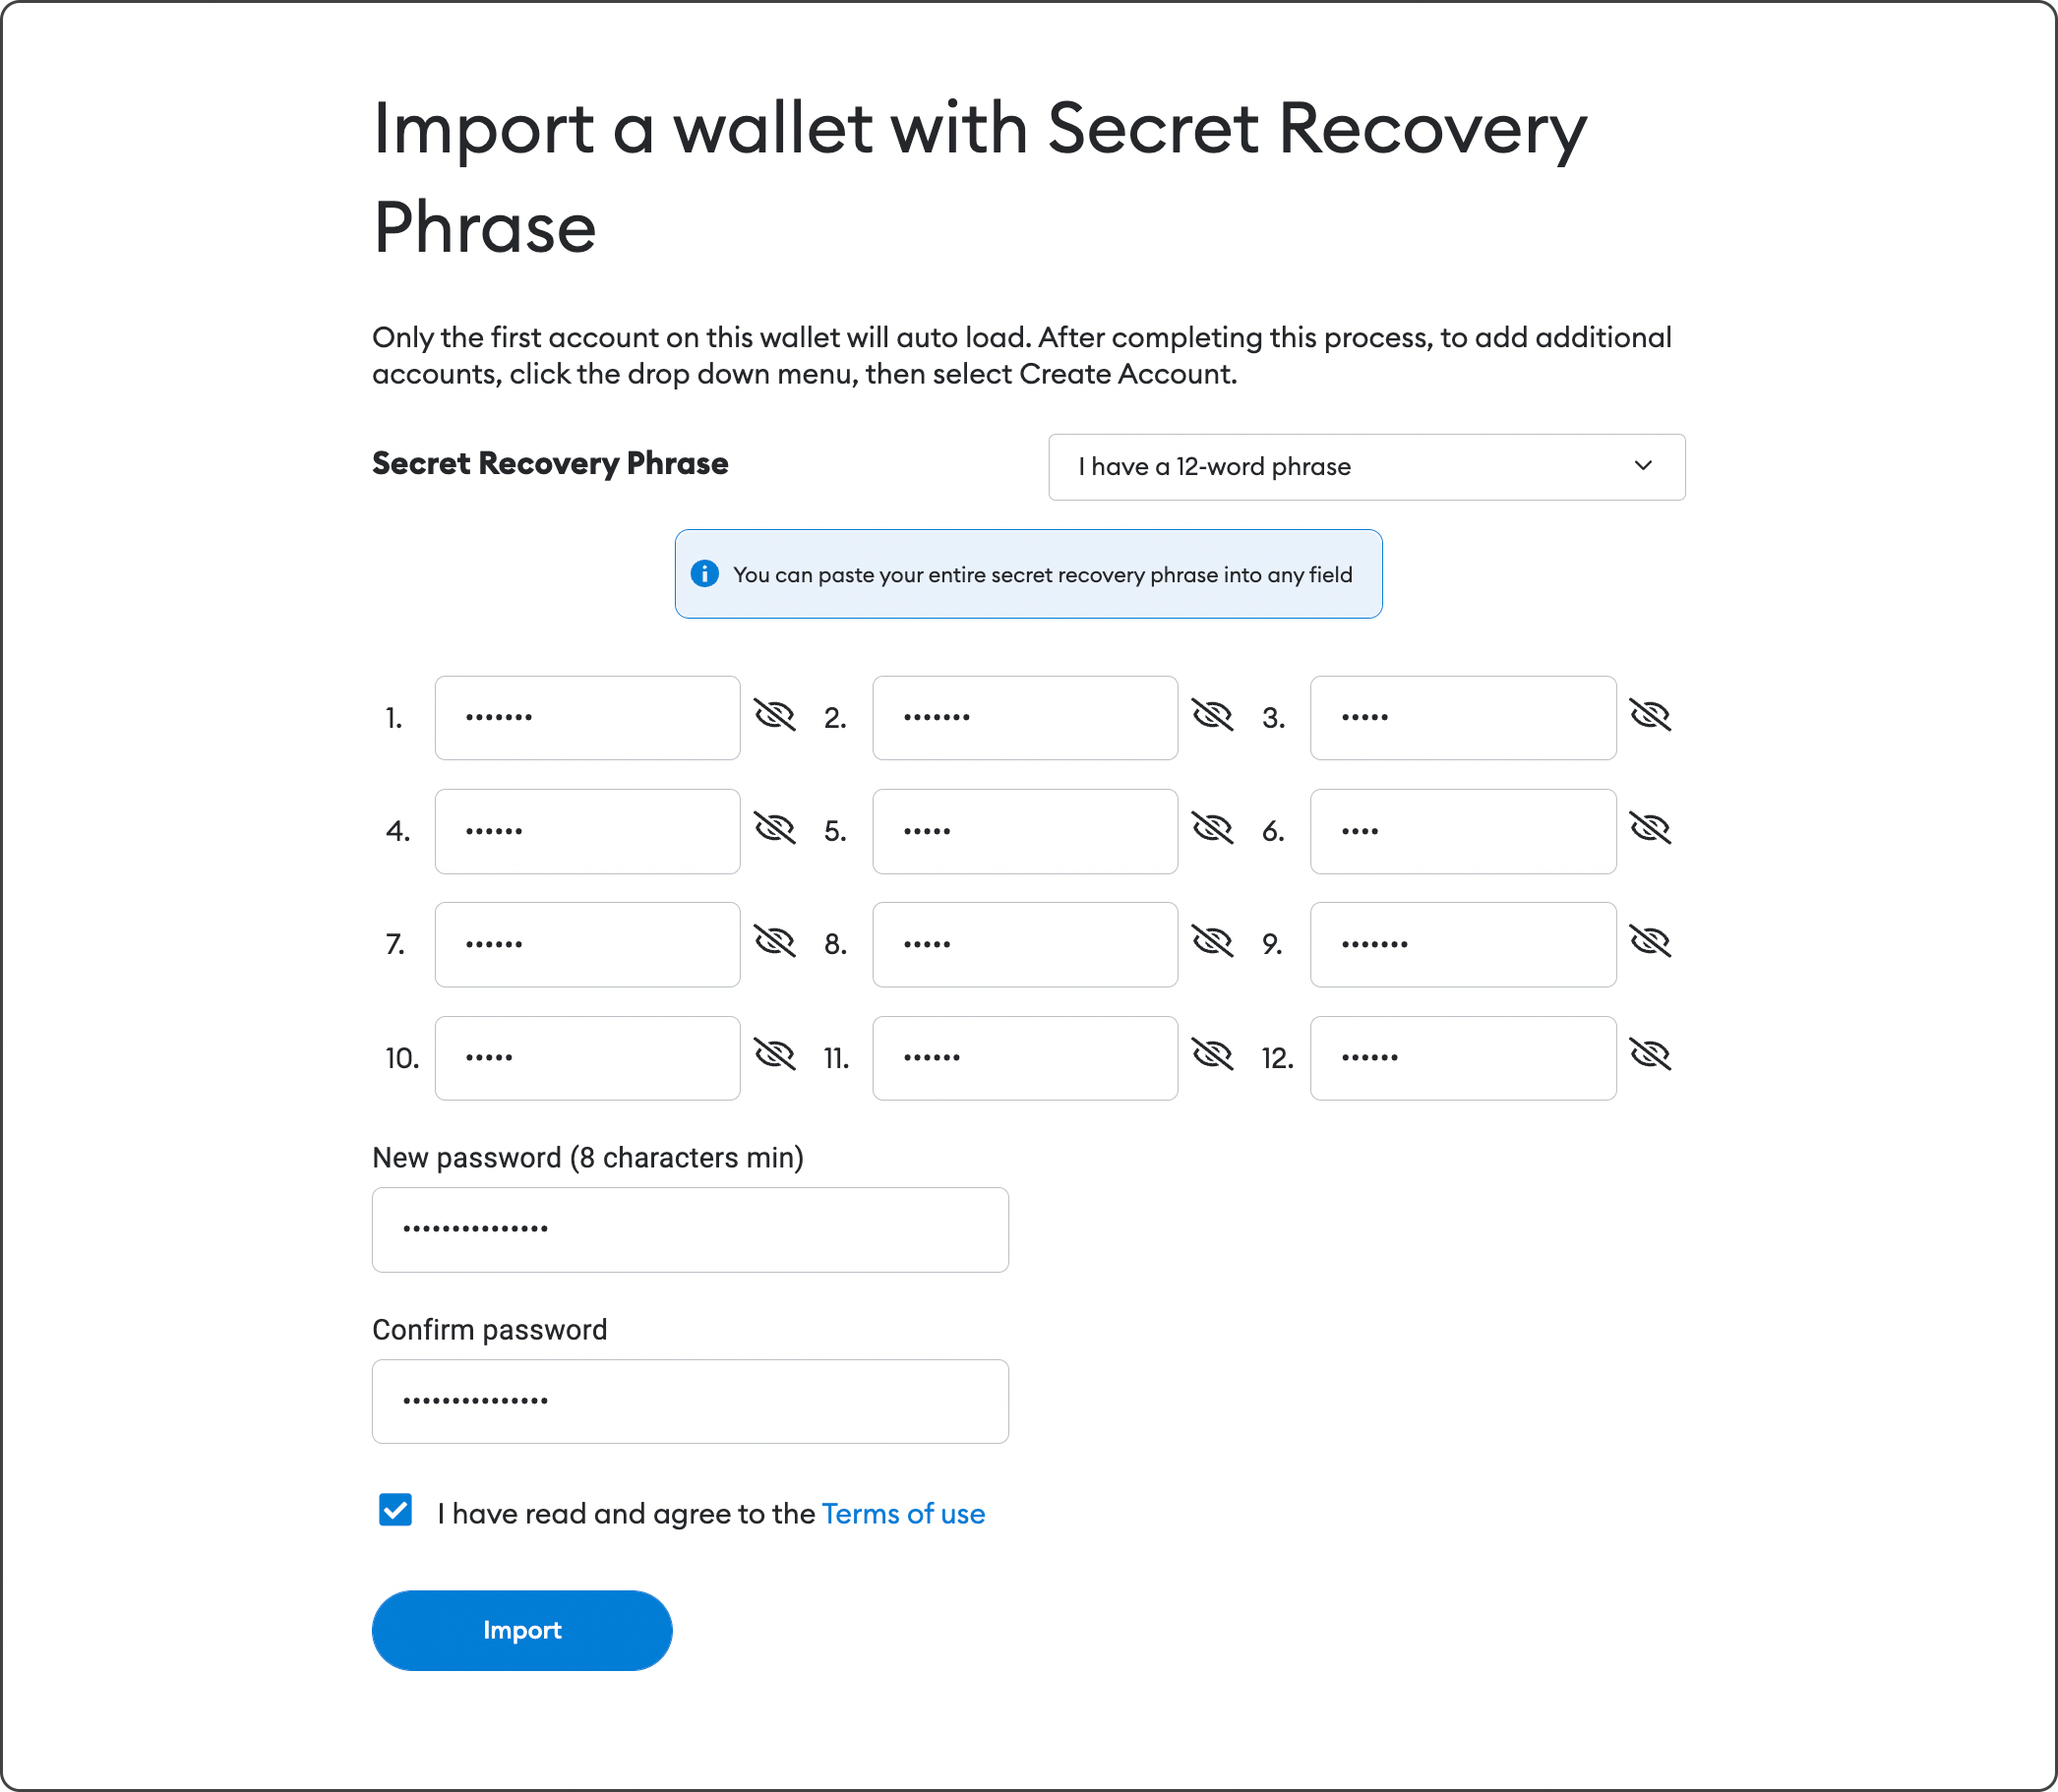 recover secondary metamask accounts